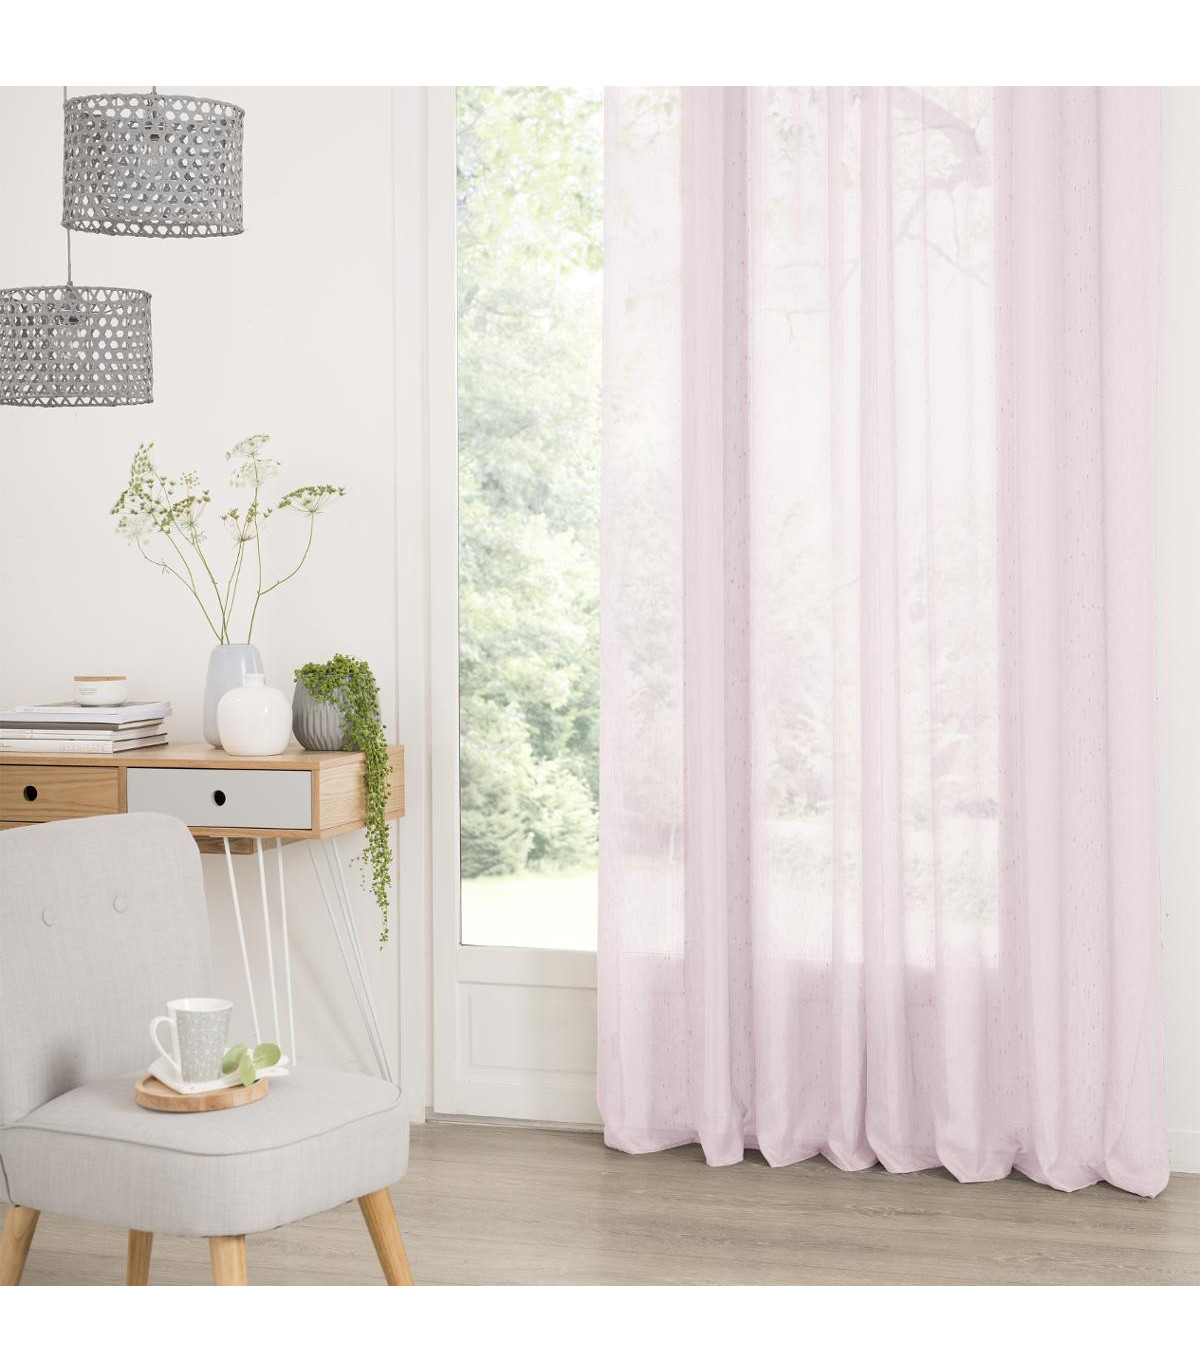 voilage-rose-a-rayures-140-x-240-cm